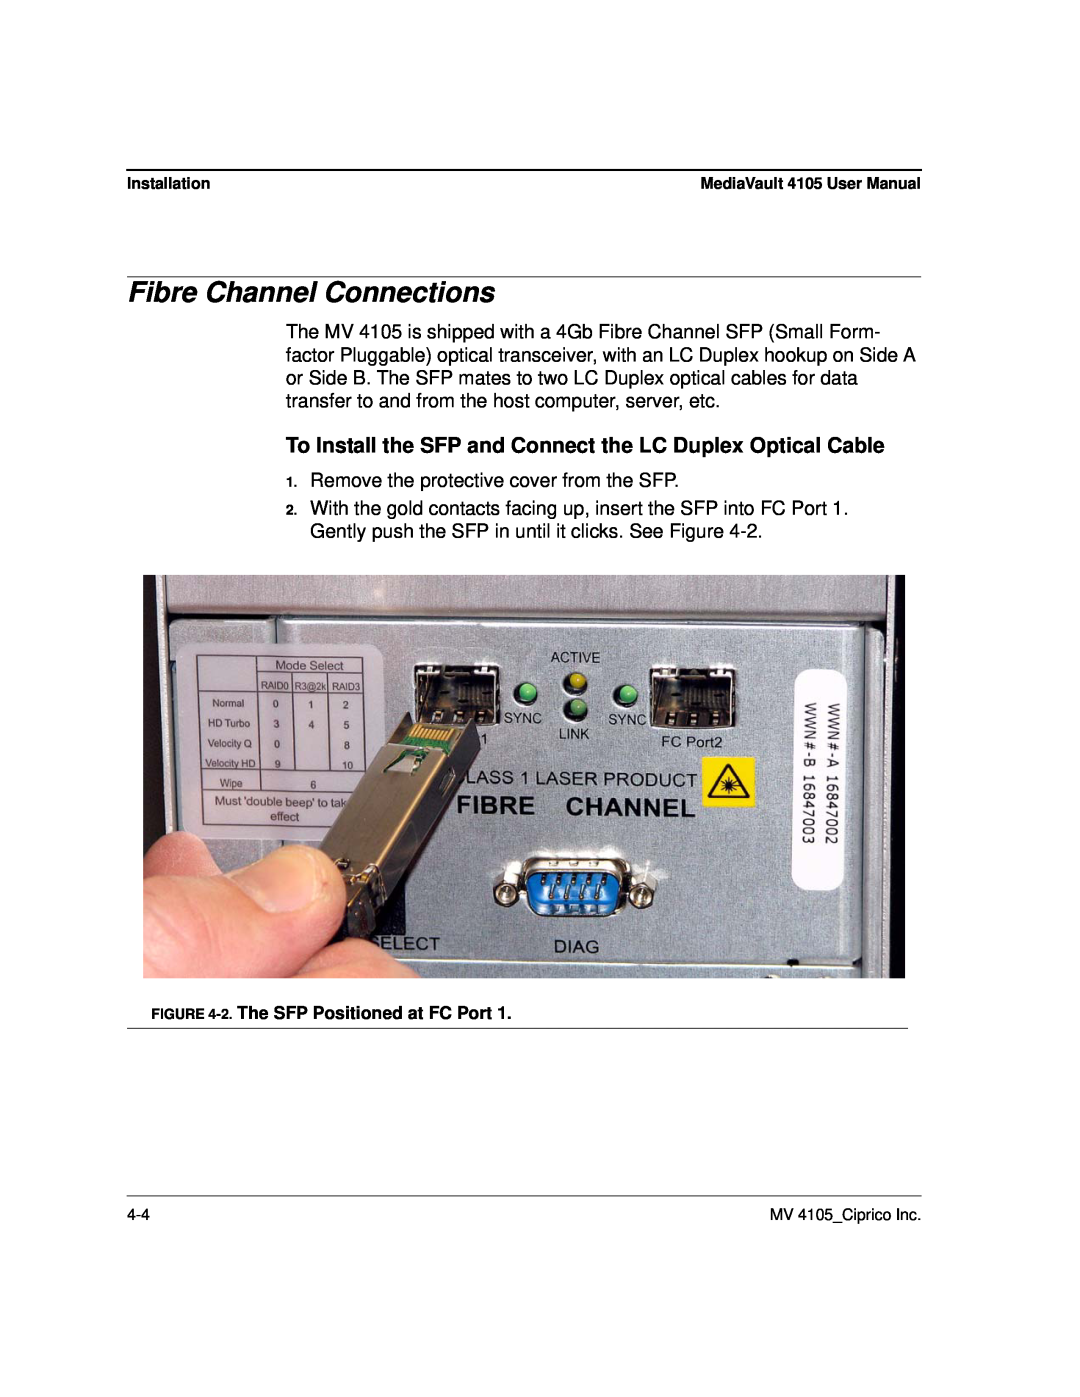 Ciprico 4105 Series user manual Fibre Channel Connections, To Install the SFP and Connect the LC Duplex Optical Cable 